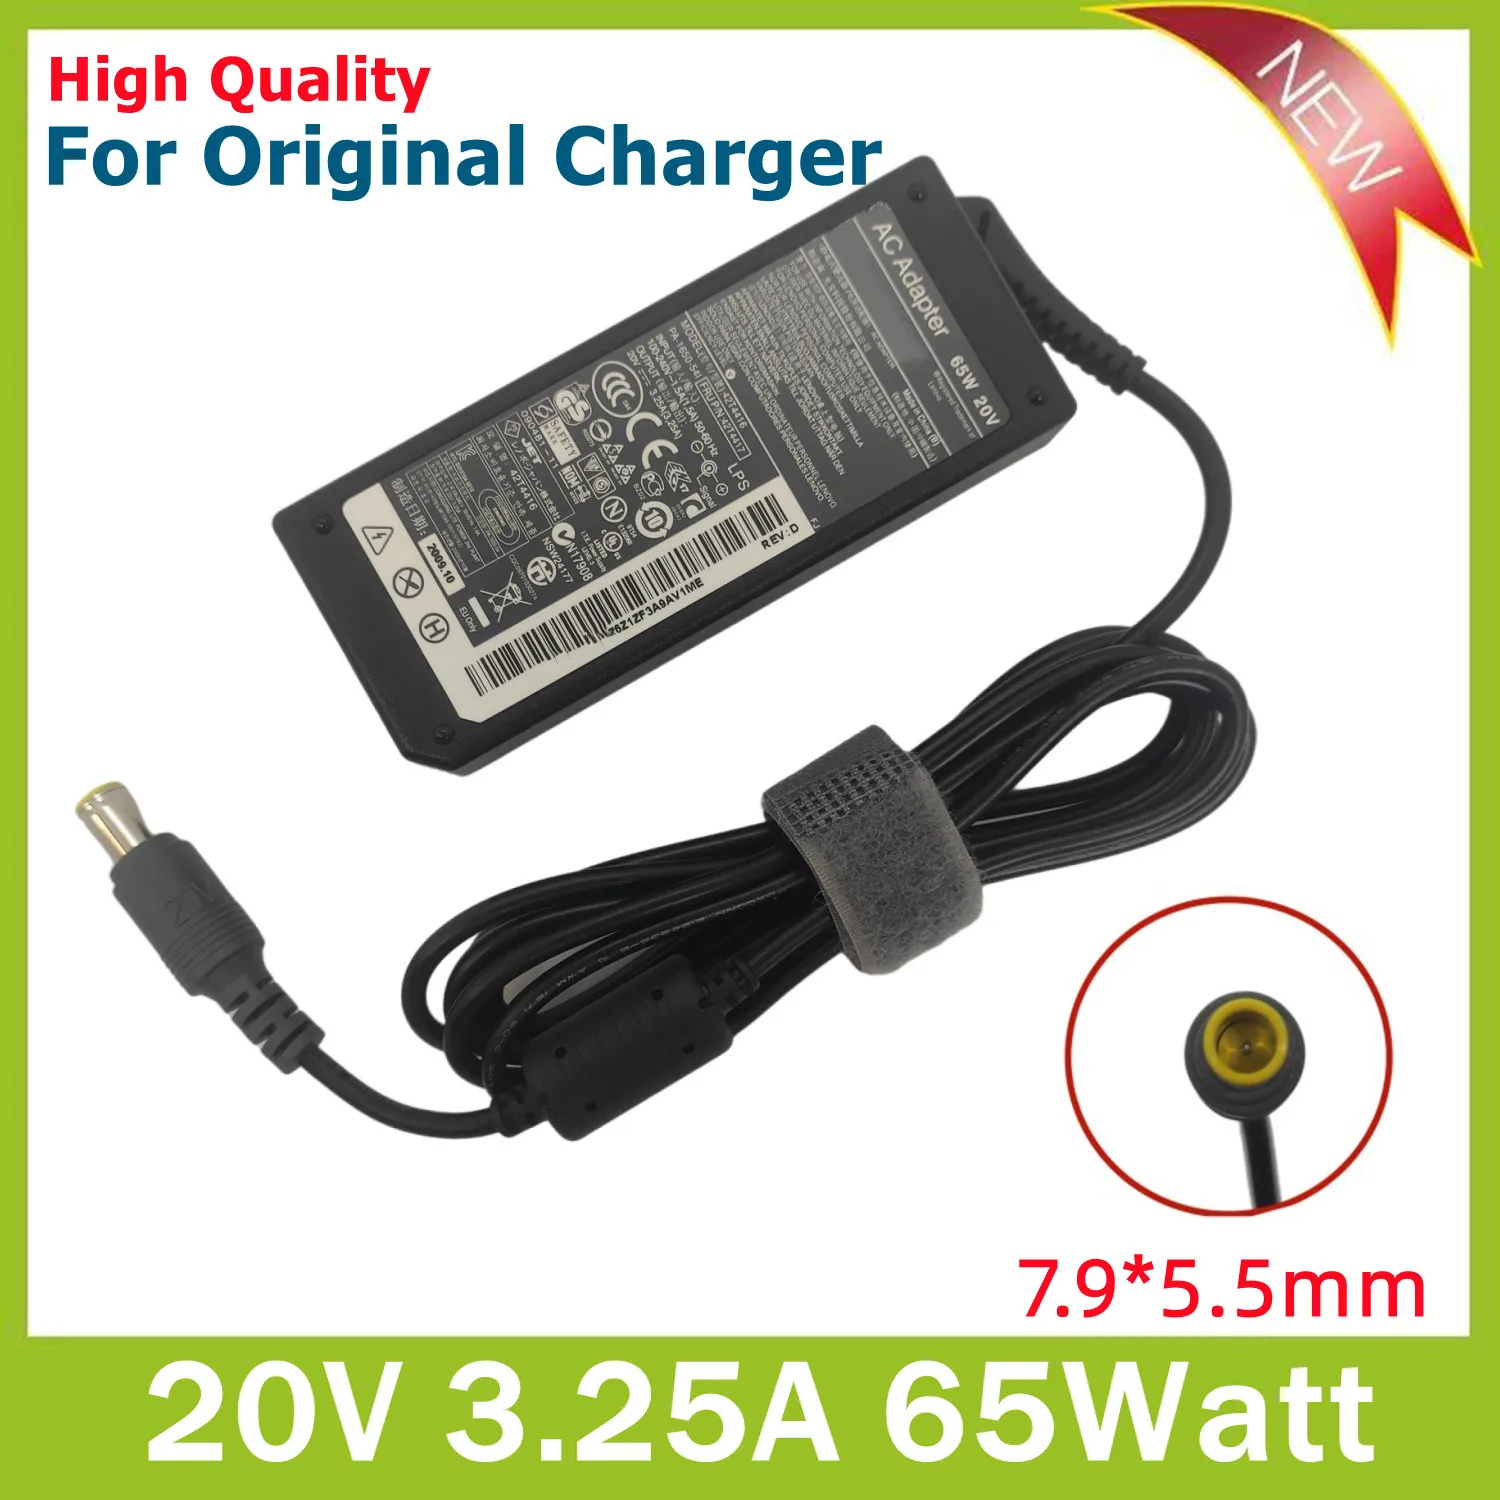 

Original 20V 3.25A AC Adapter Laptop Charger For Lenovo Thinkpad R60 R61 T60 T61P x220 X201i X61s x200 X60 X61 E40 X301 45N0119